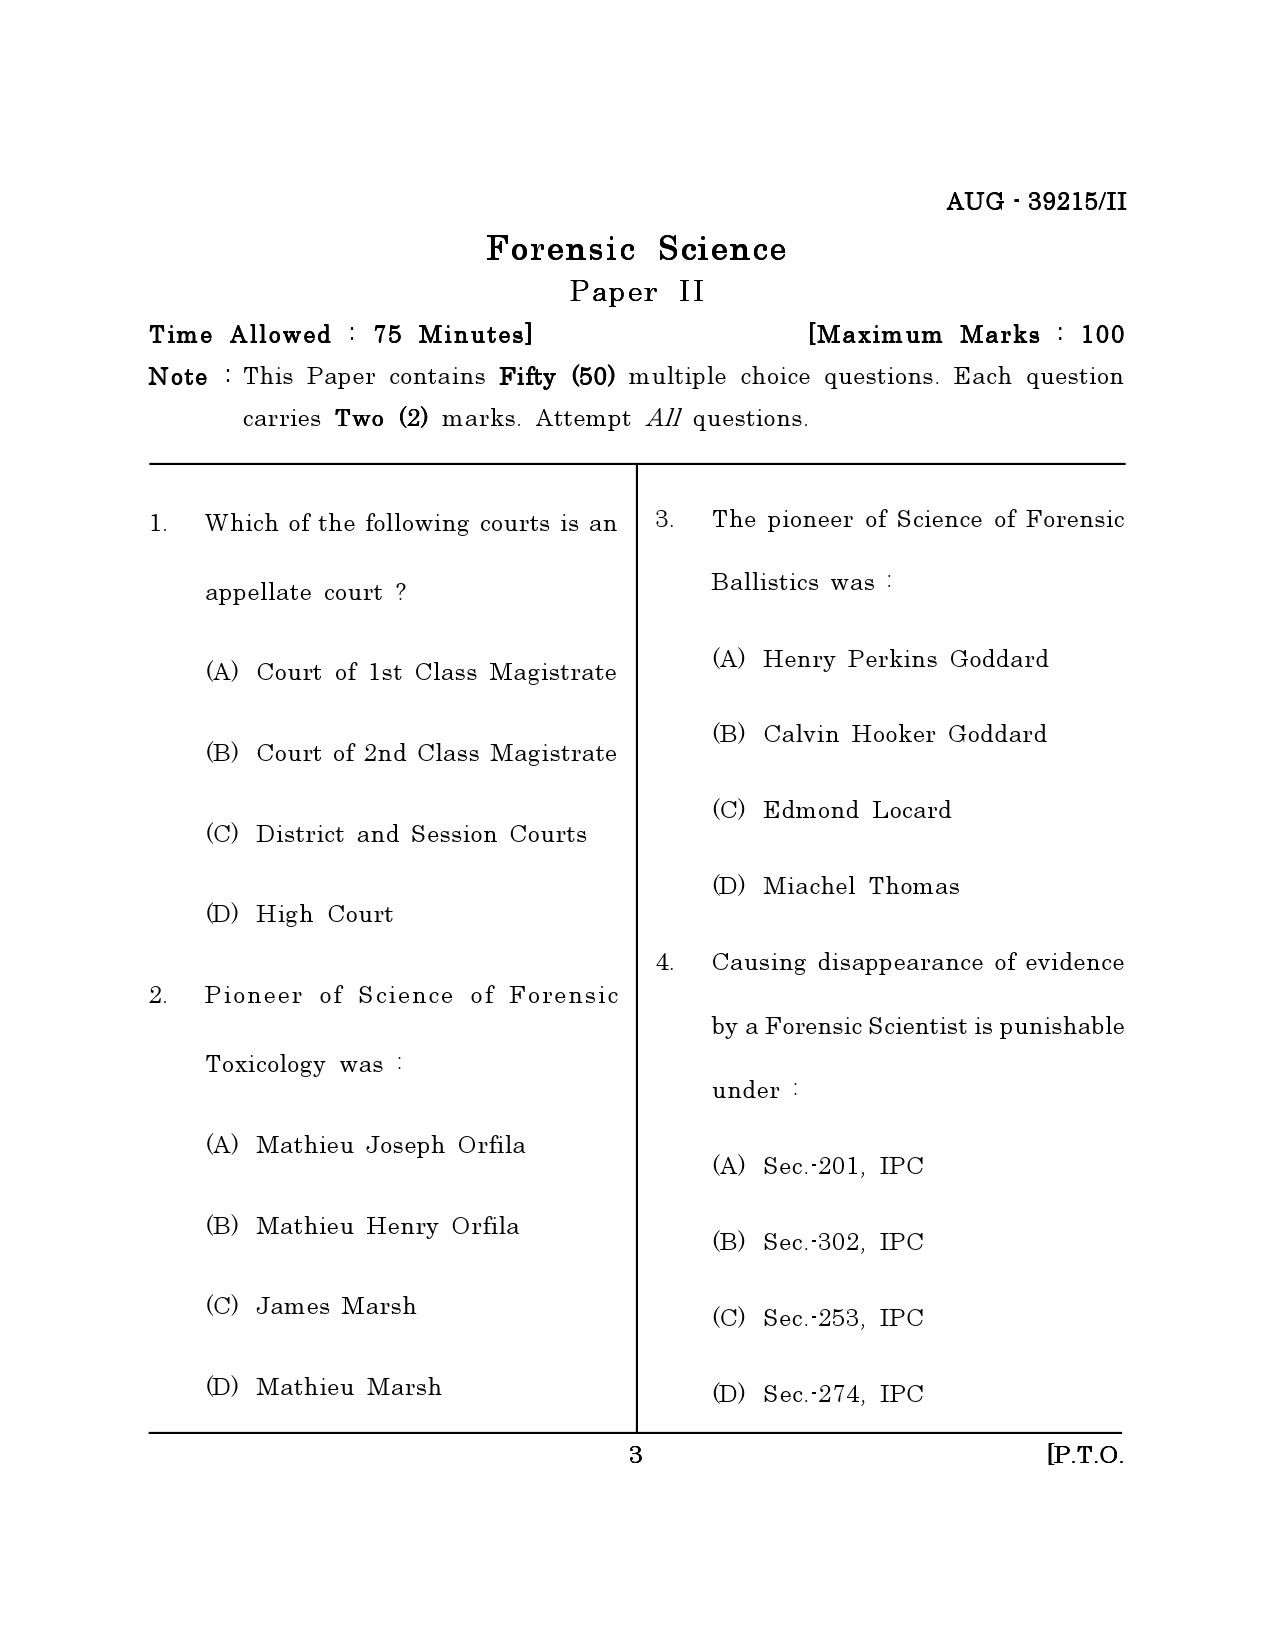 Maharashtra SET Forensic Science Question Paper II August 2015 2